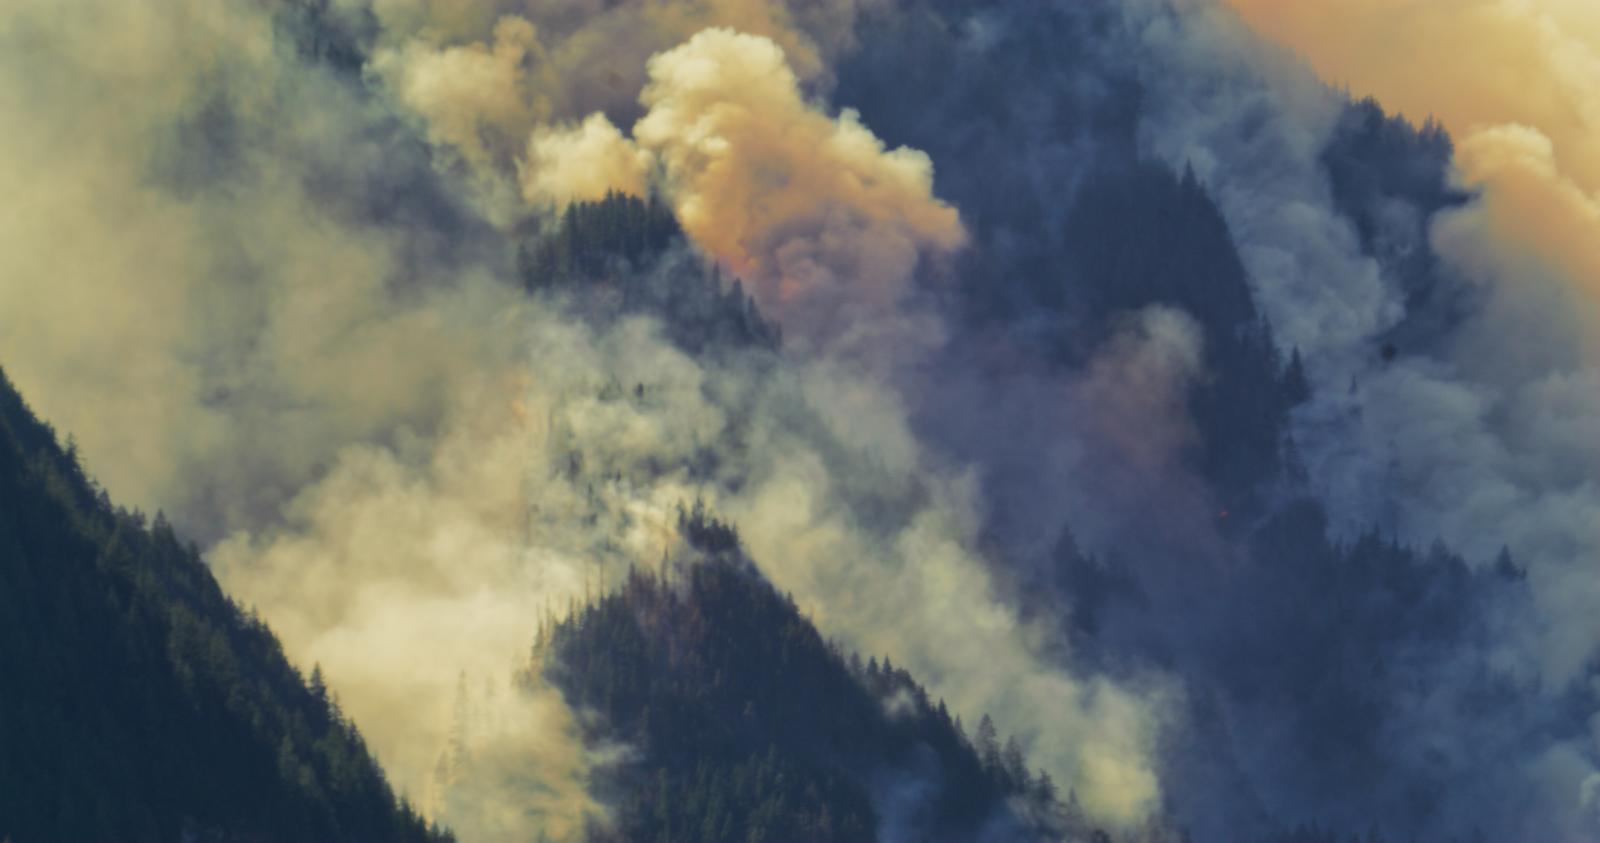 Wildfire Closeup | Buy this image